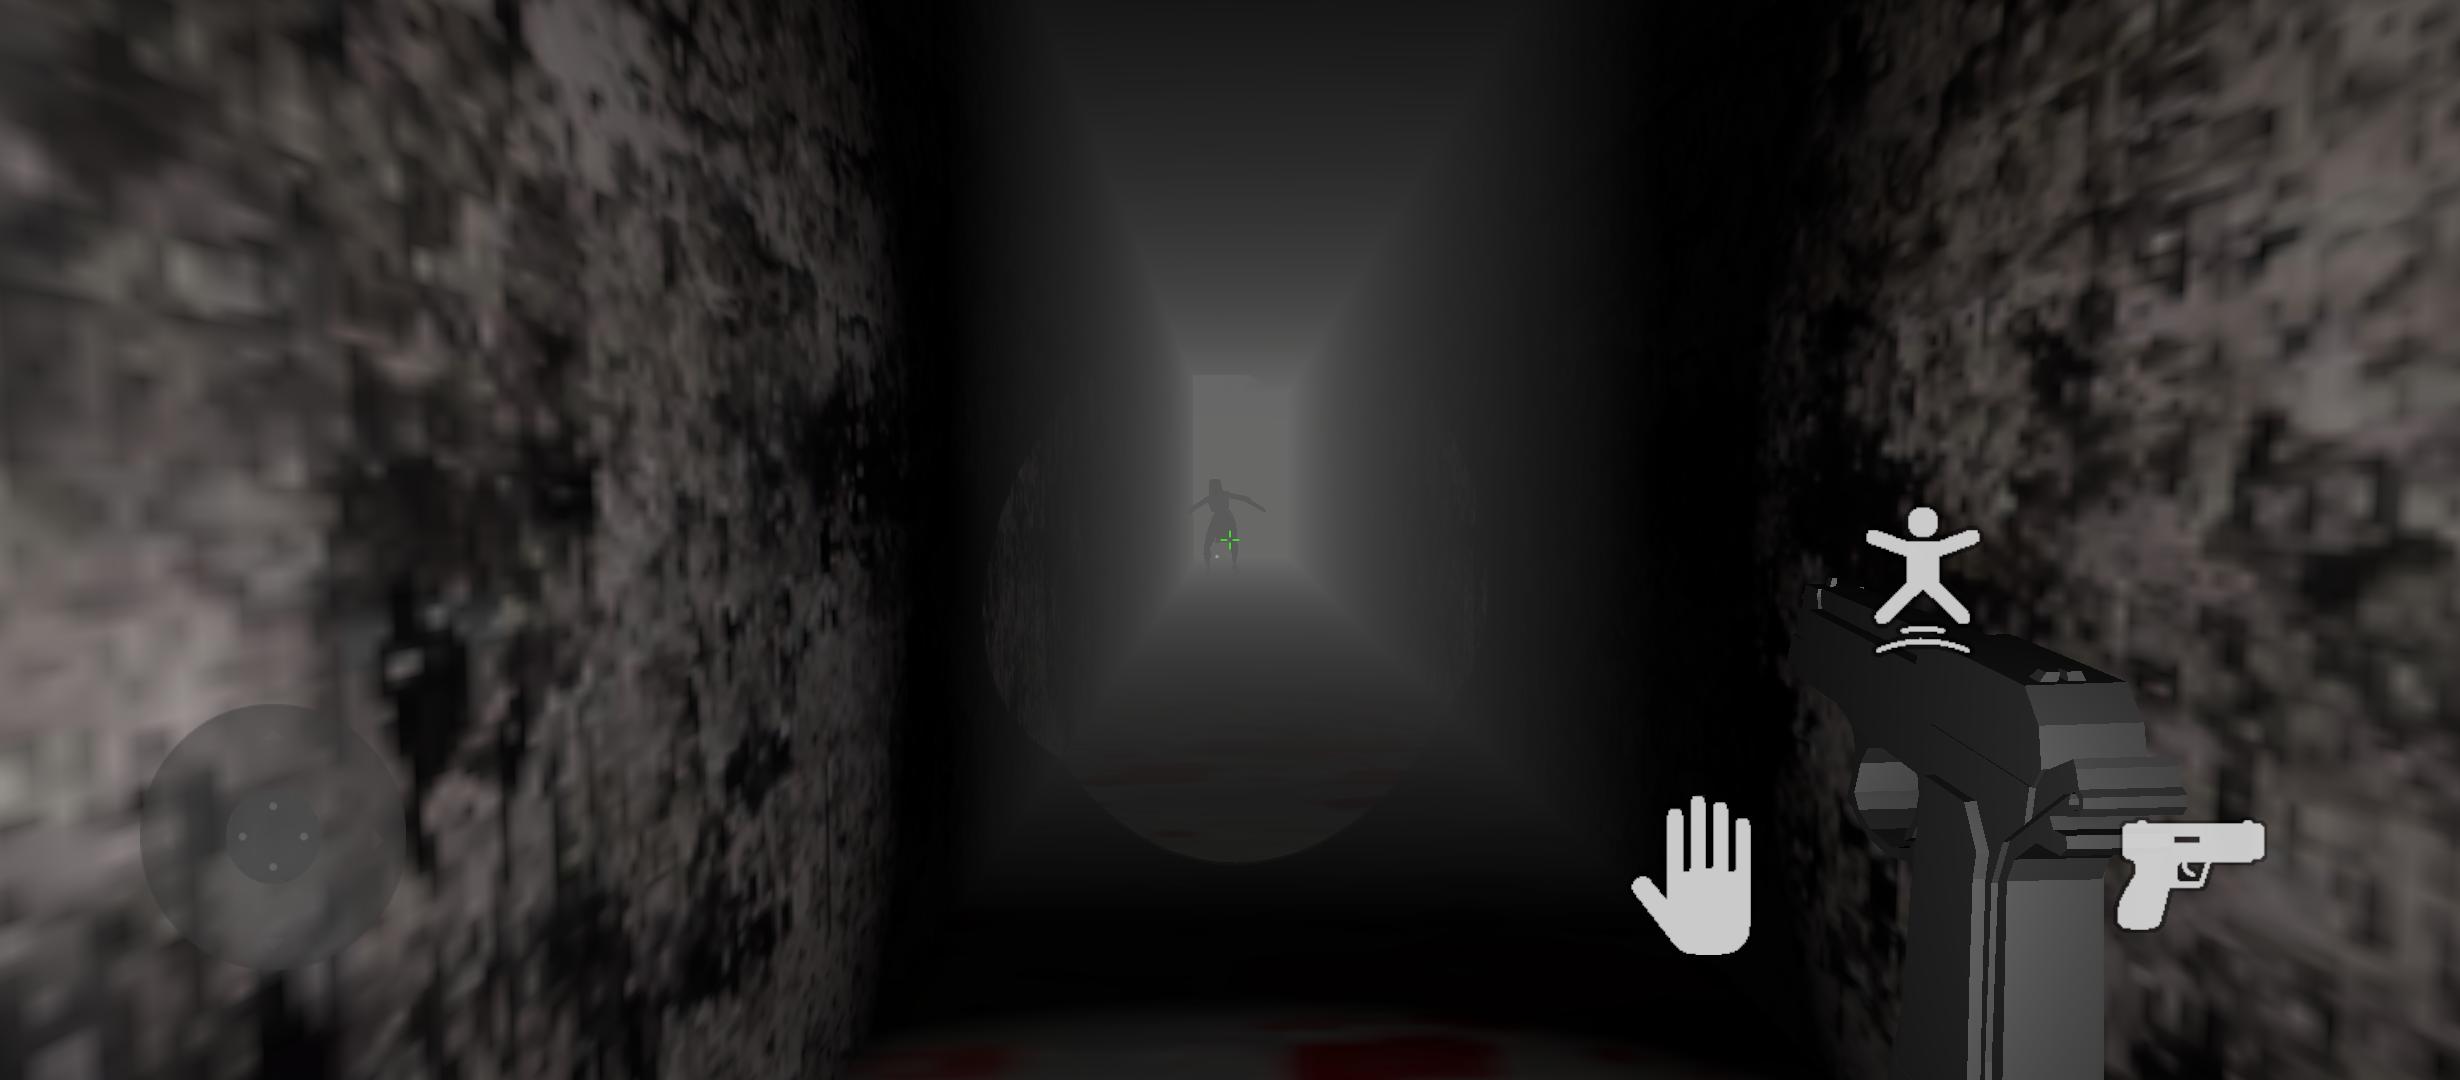 SCP 096 : Haunted House for Android - Free App Download